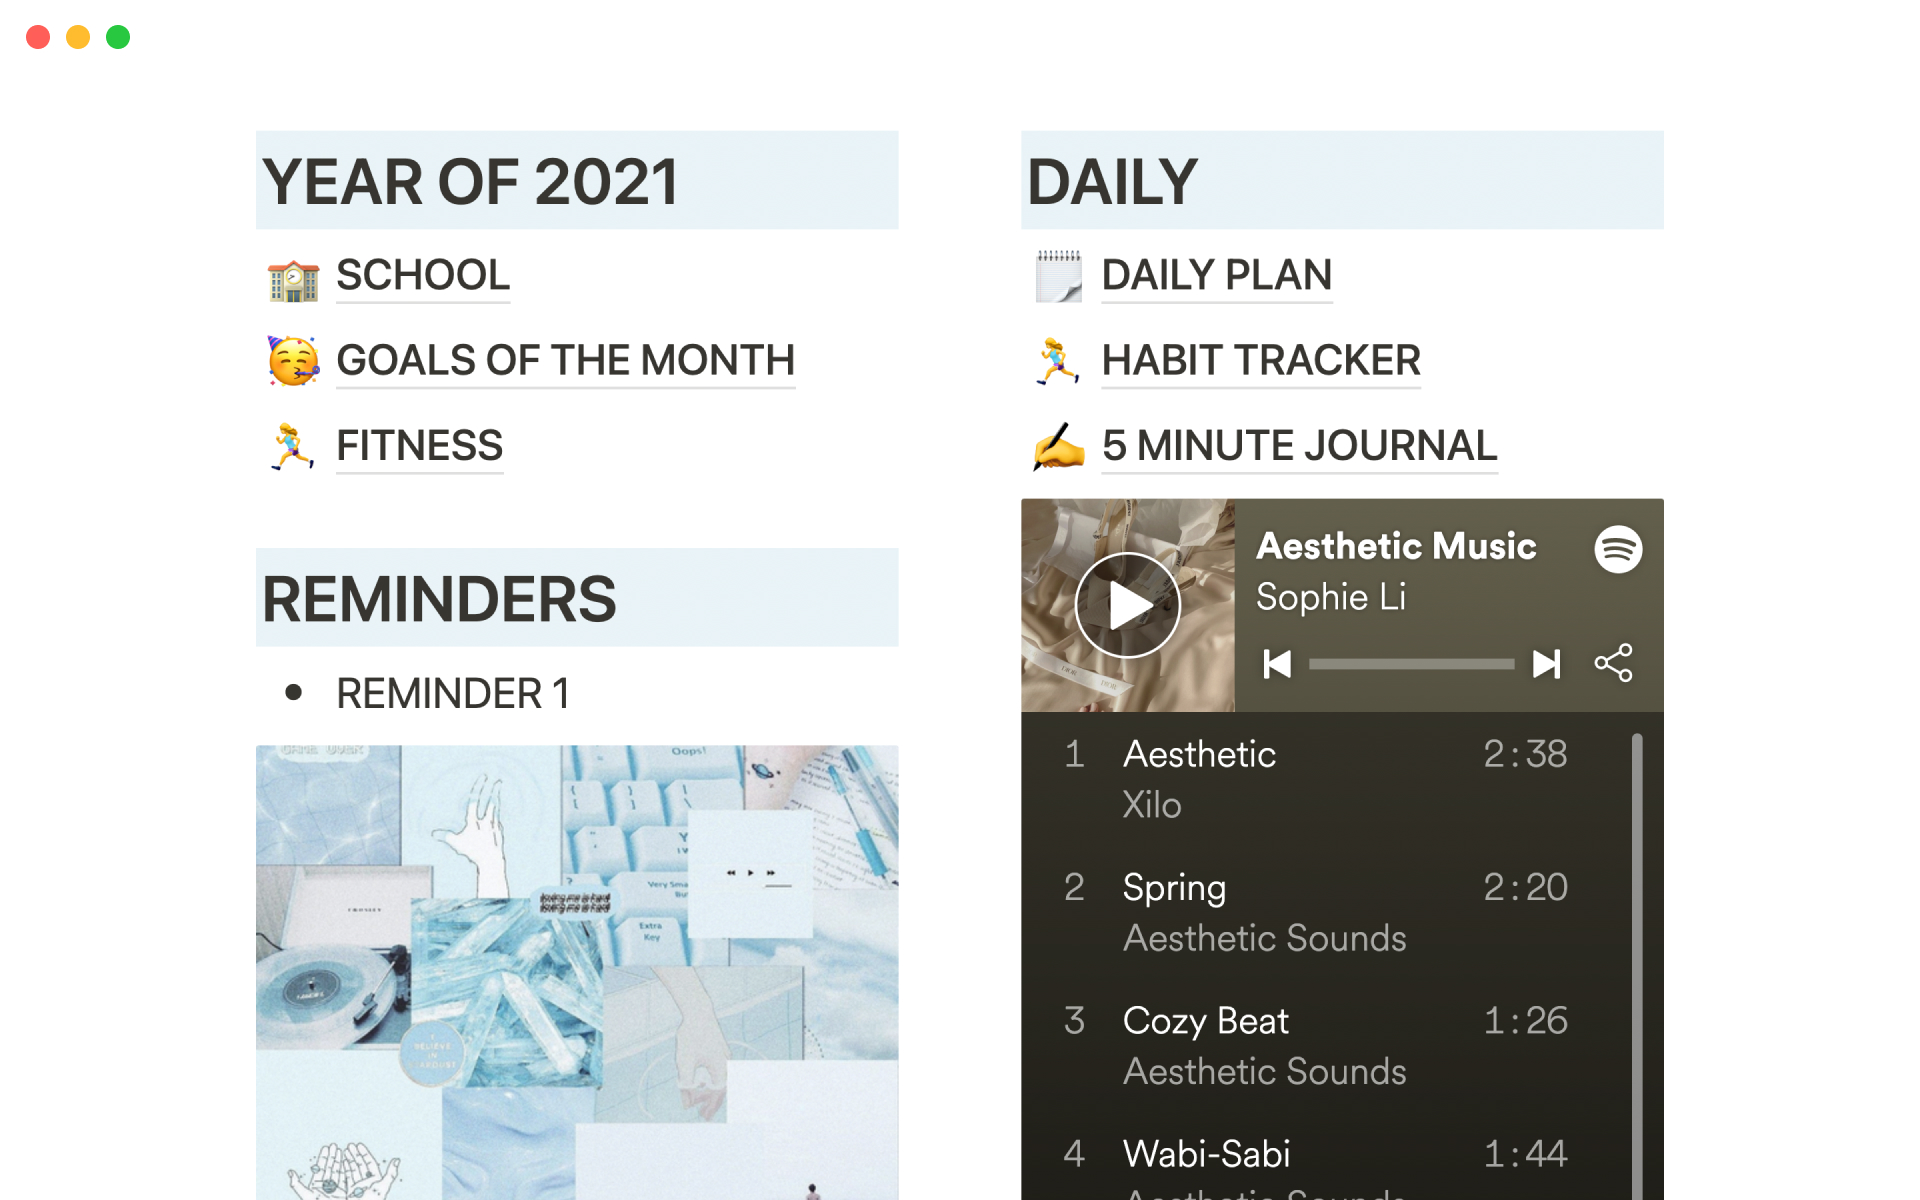 Become more organized, productive, and efficient with this dashboard, perfect for students.